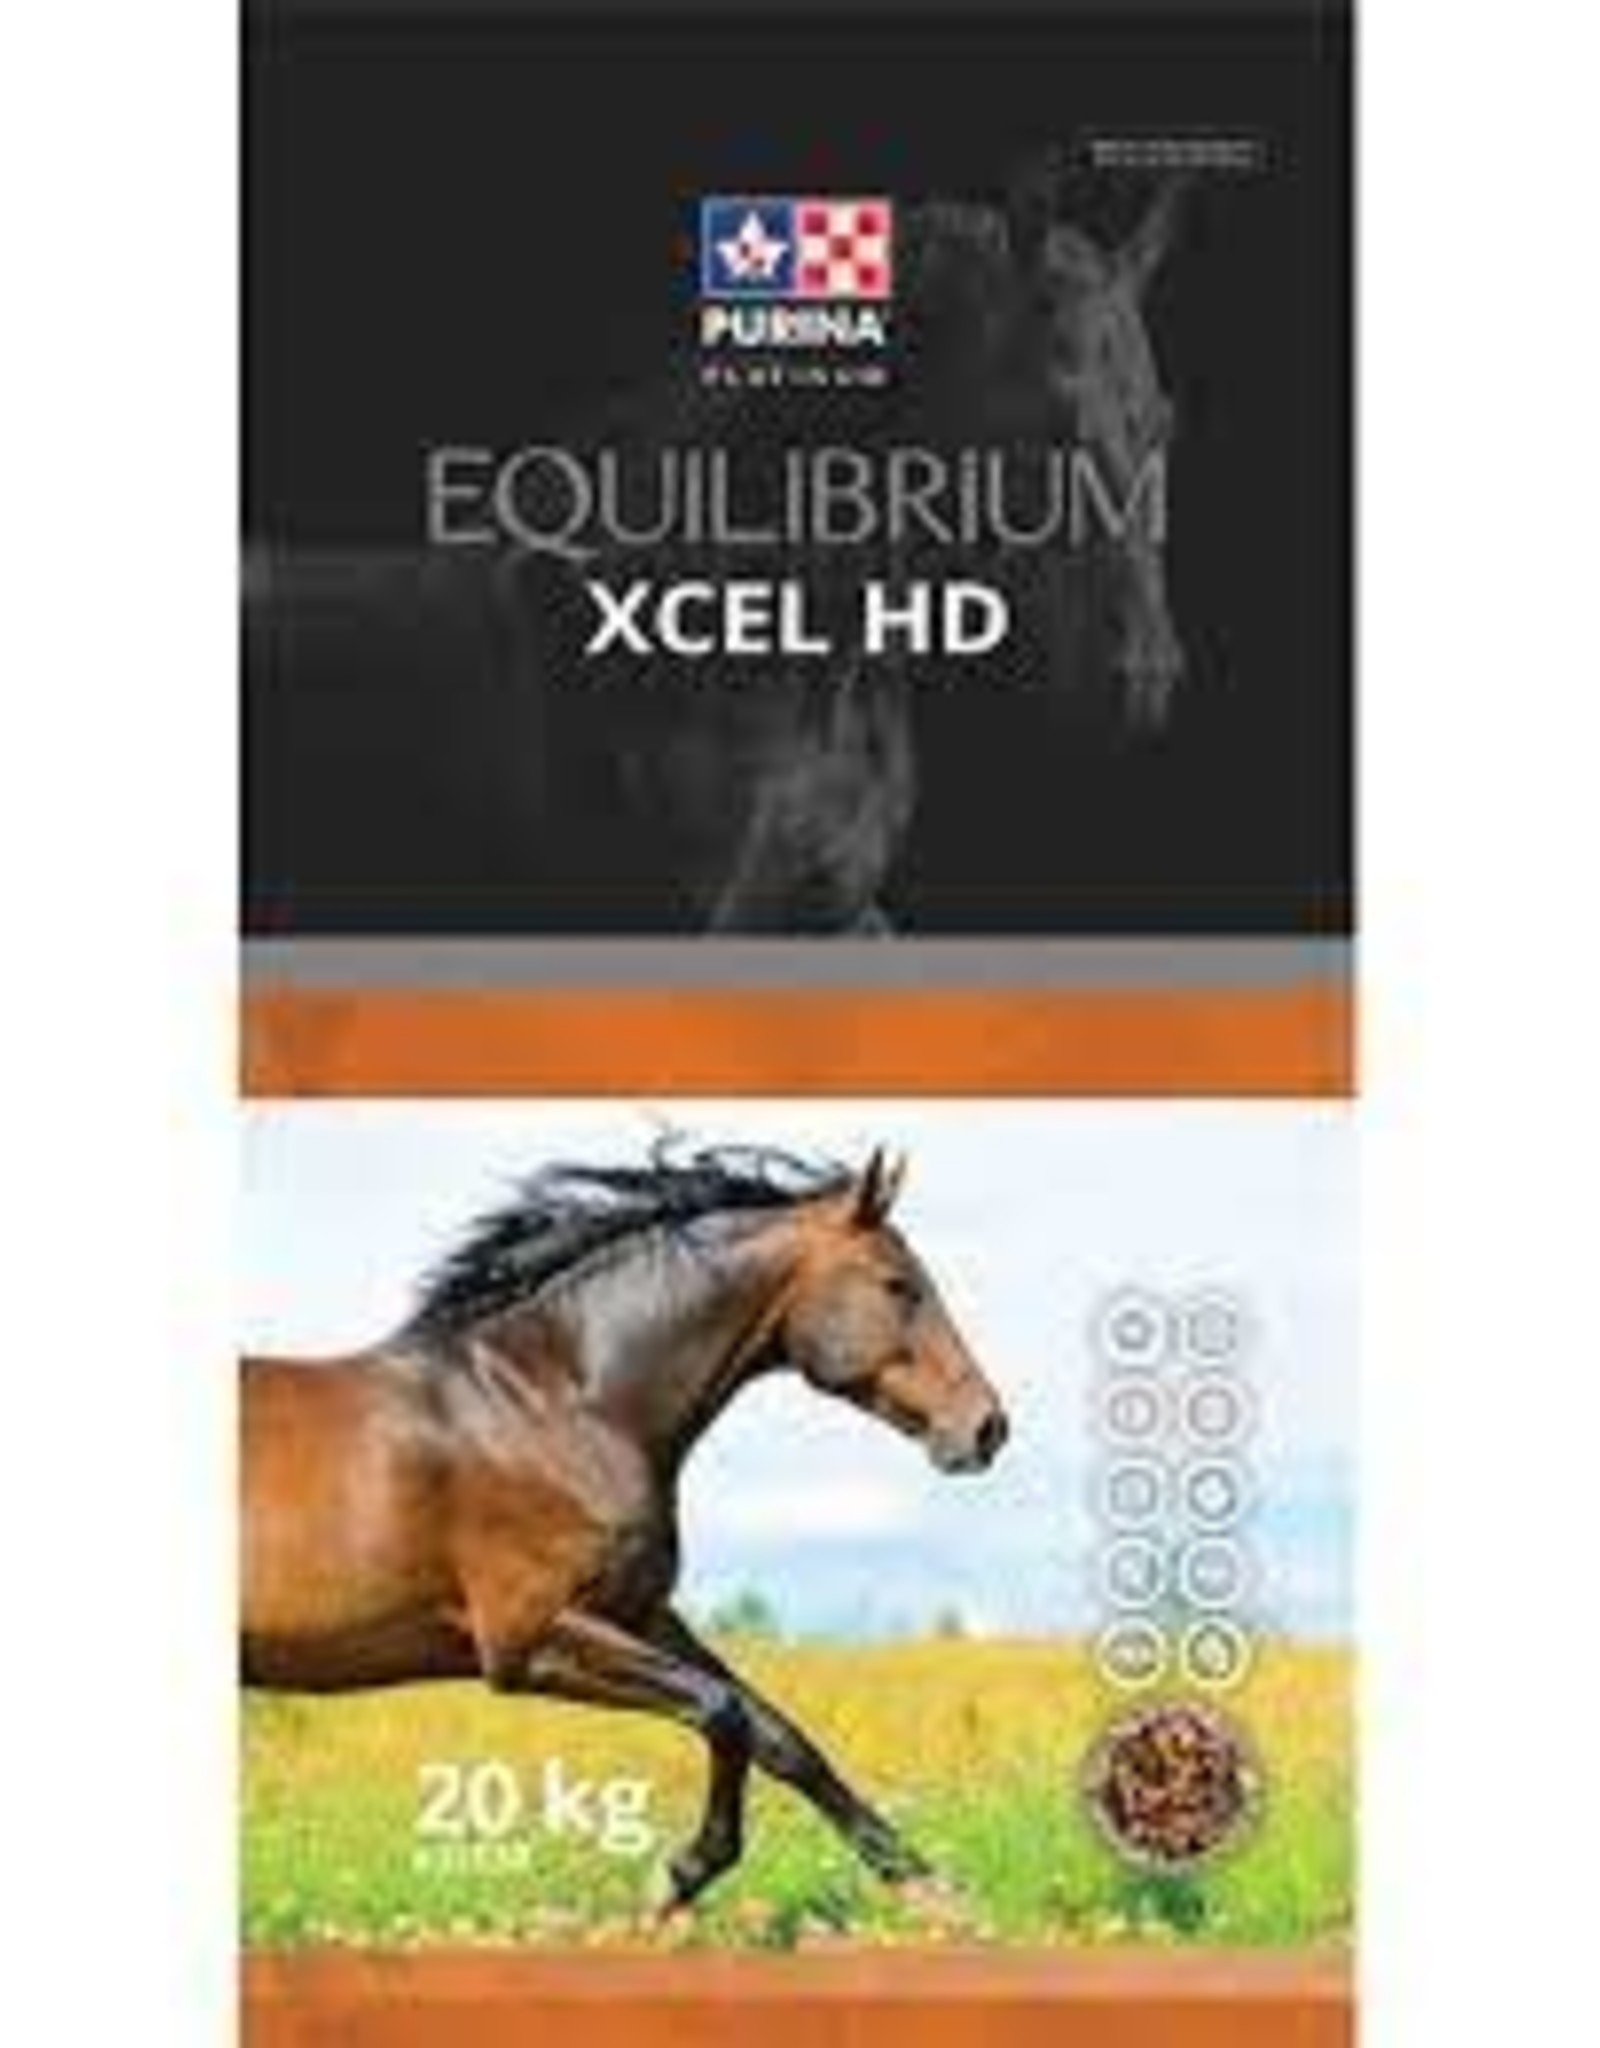 Purina PURINA EQUILIBRIUM XCEL HD 20kg  -  CP 35530 -  NCS 15.5% - CP 13%, Fat 12%, Fiber 15% - High-fat / low glycemic feed contains higher fat and fiber content and is intended for equine athletes and hard keepers.